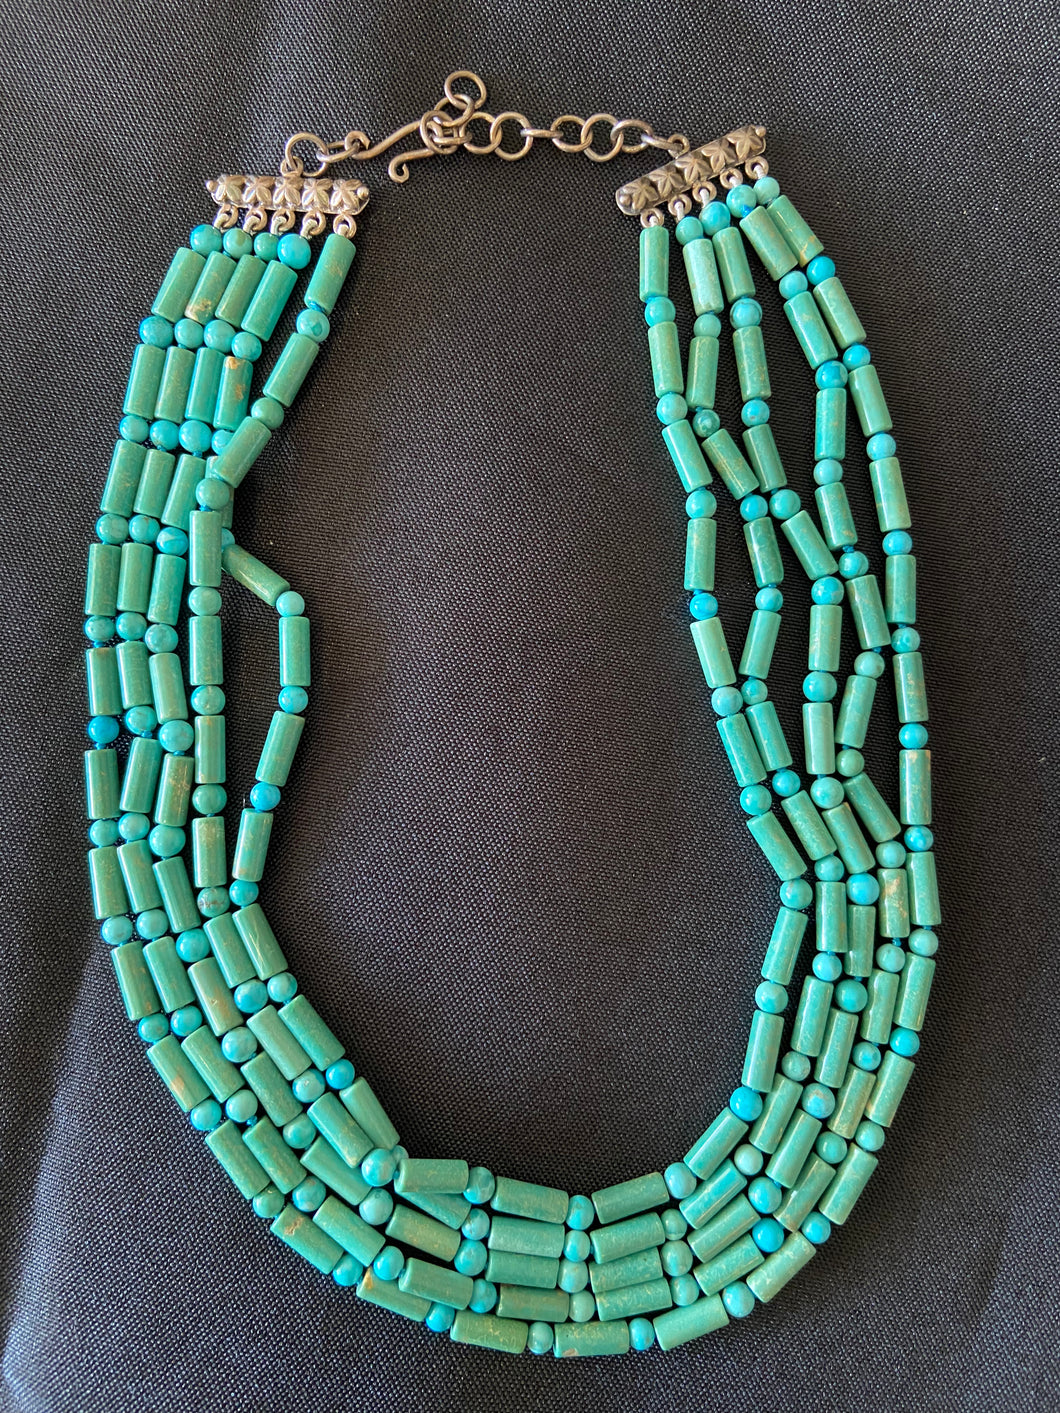 Vintage American Turquoise Necklace with Sterling Silver Antique Clasp